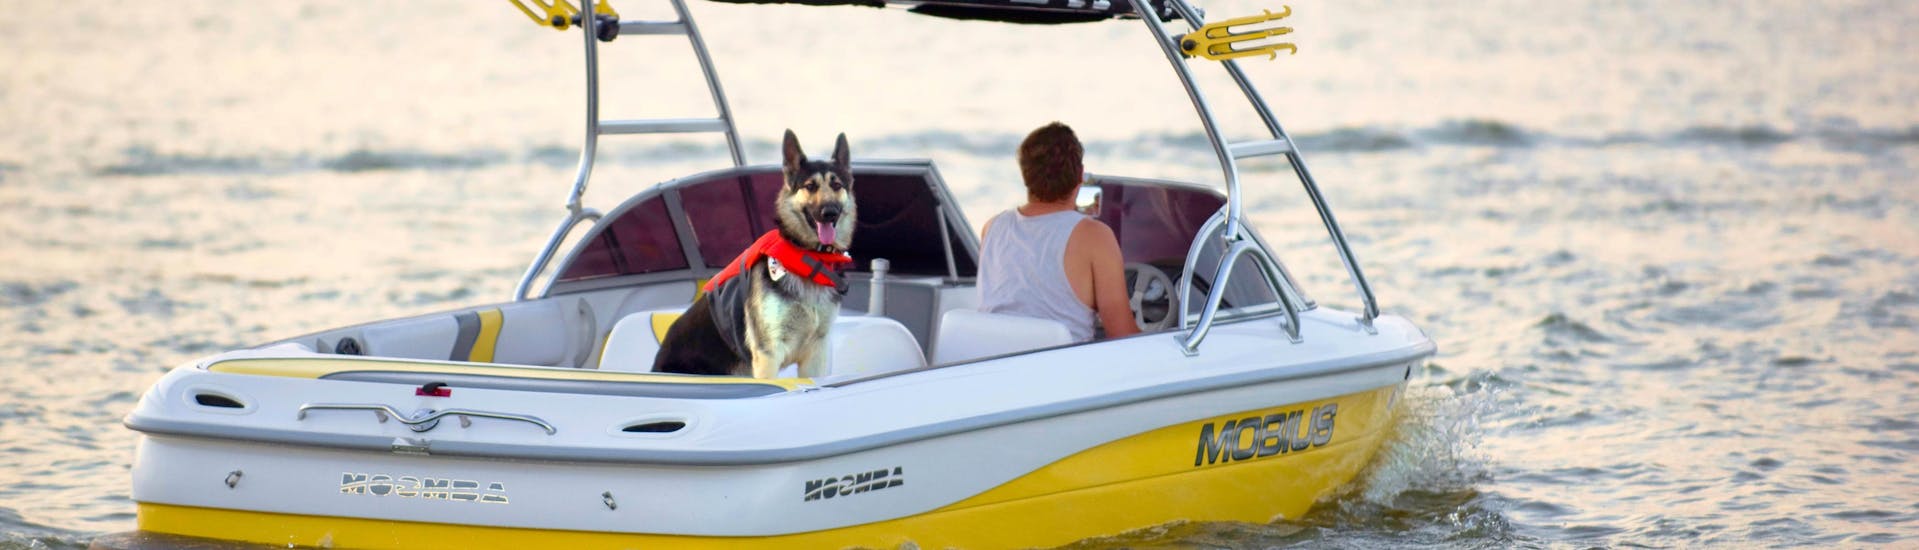 A person having fun with his dog during a boat rental activity with dogs and pets.